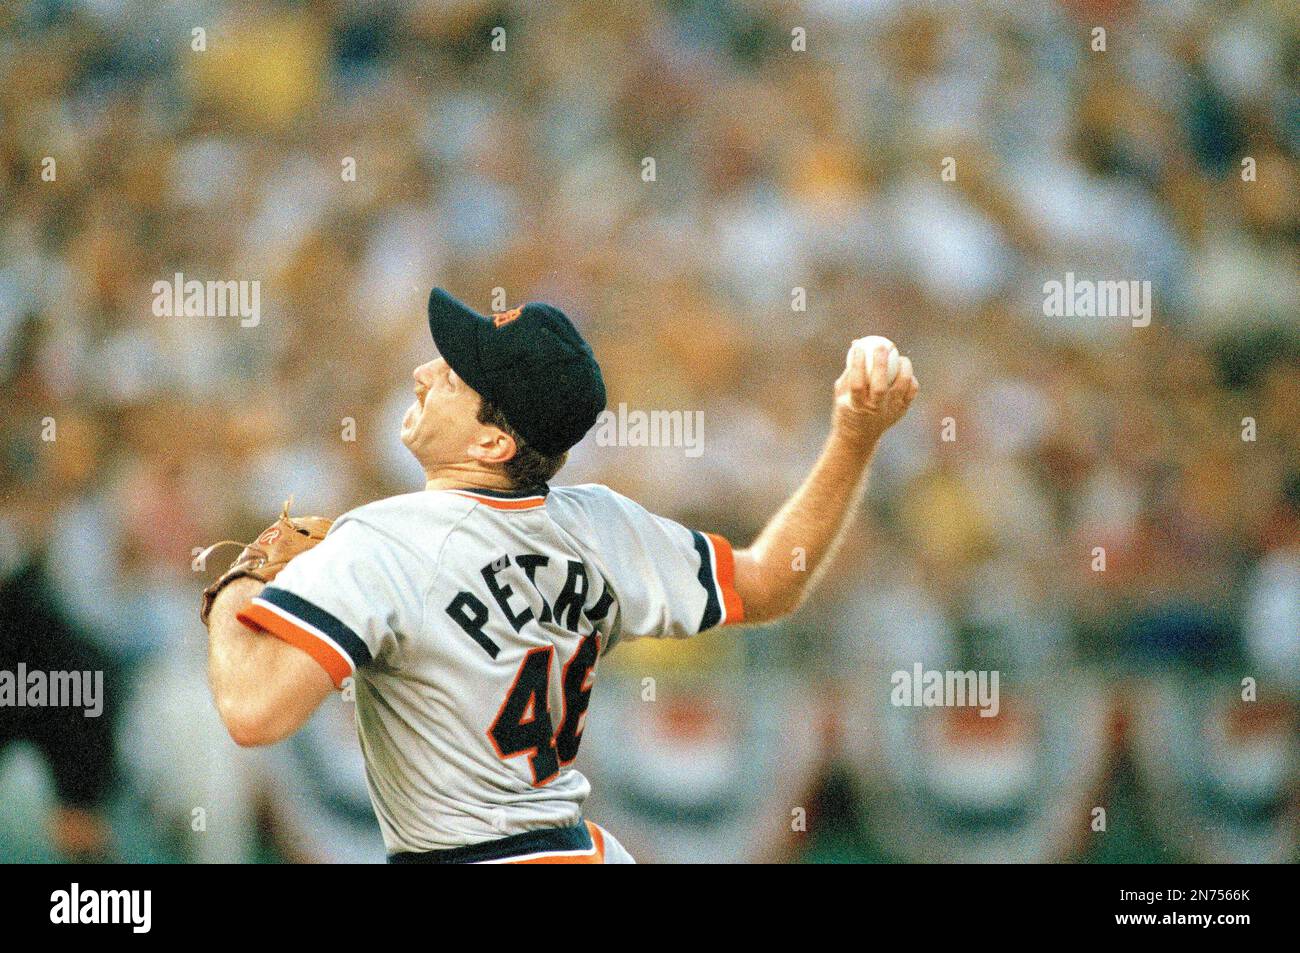 Detroit Tigers' pitcher Dan Petry in action against the San Diego Padres in  Game 2 of